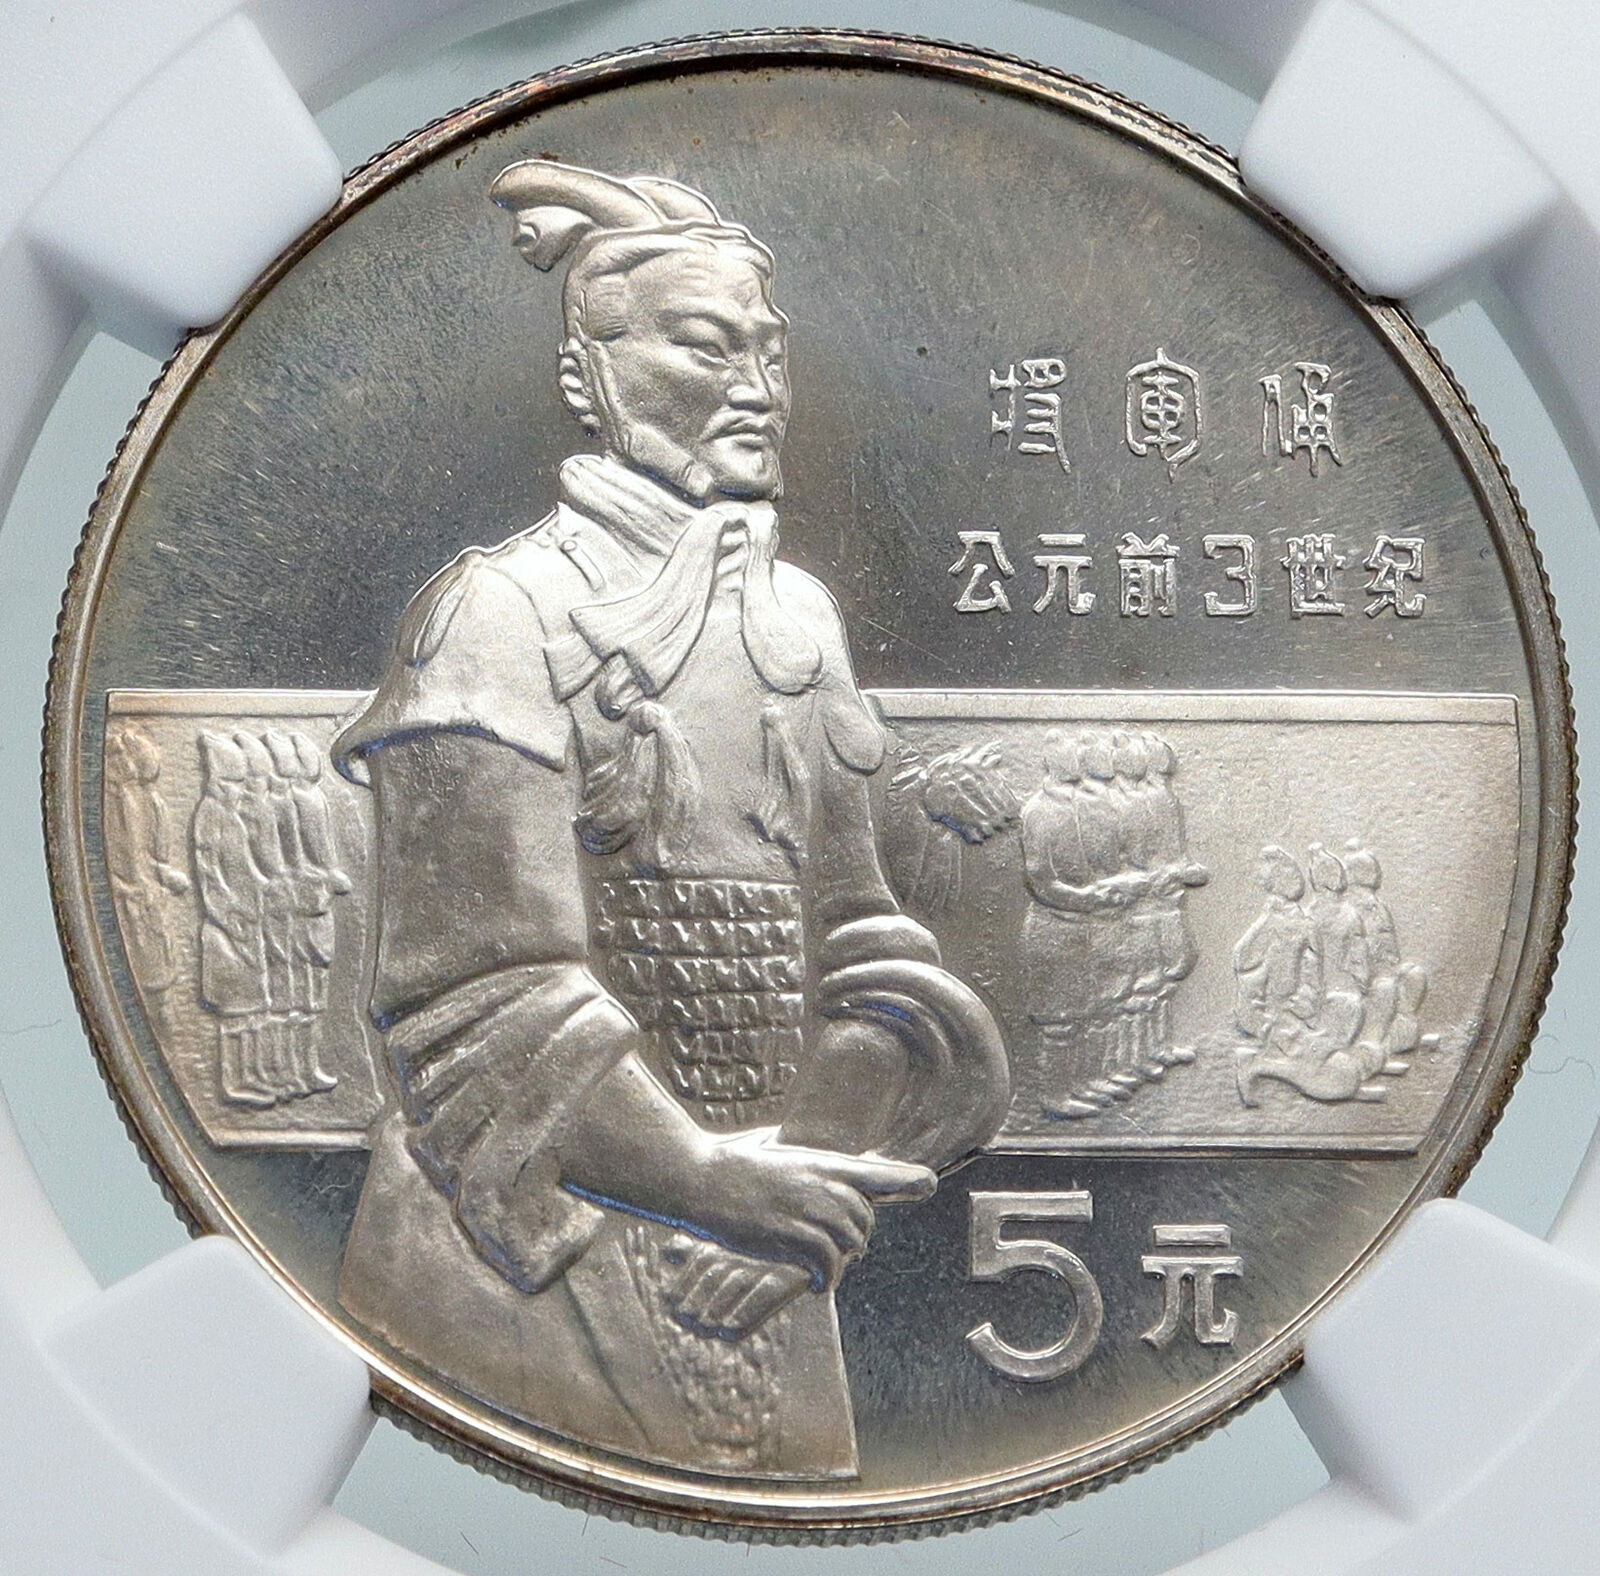 1984 CHINA Terracotta Army STATUES Archeology Proof Silver 5 Yu Coin NGC i87117